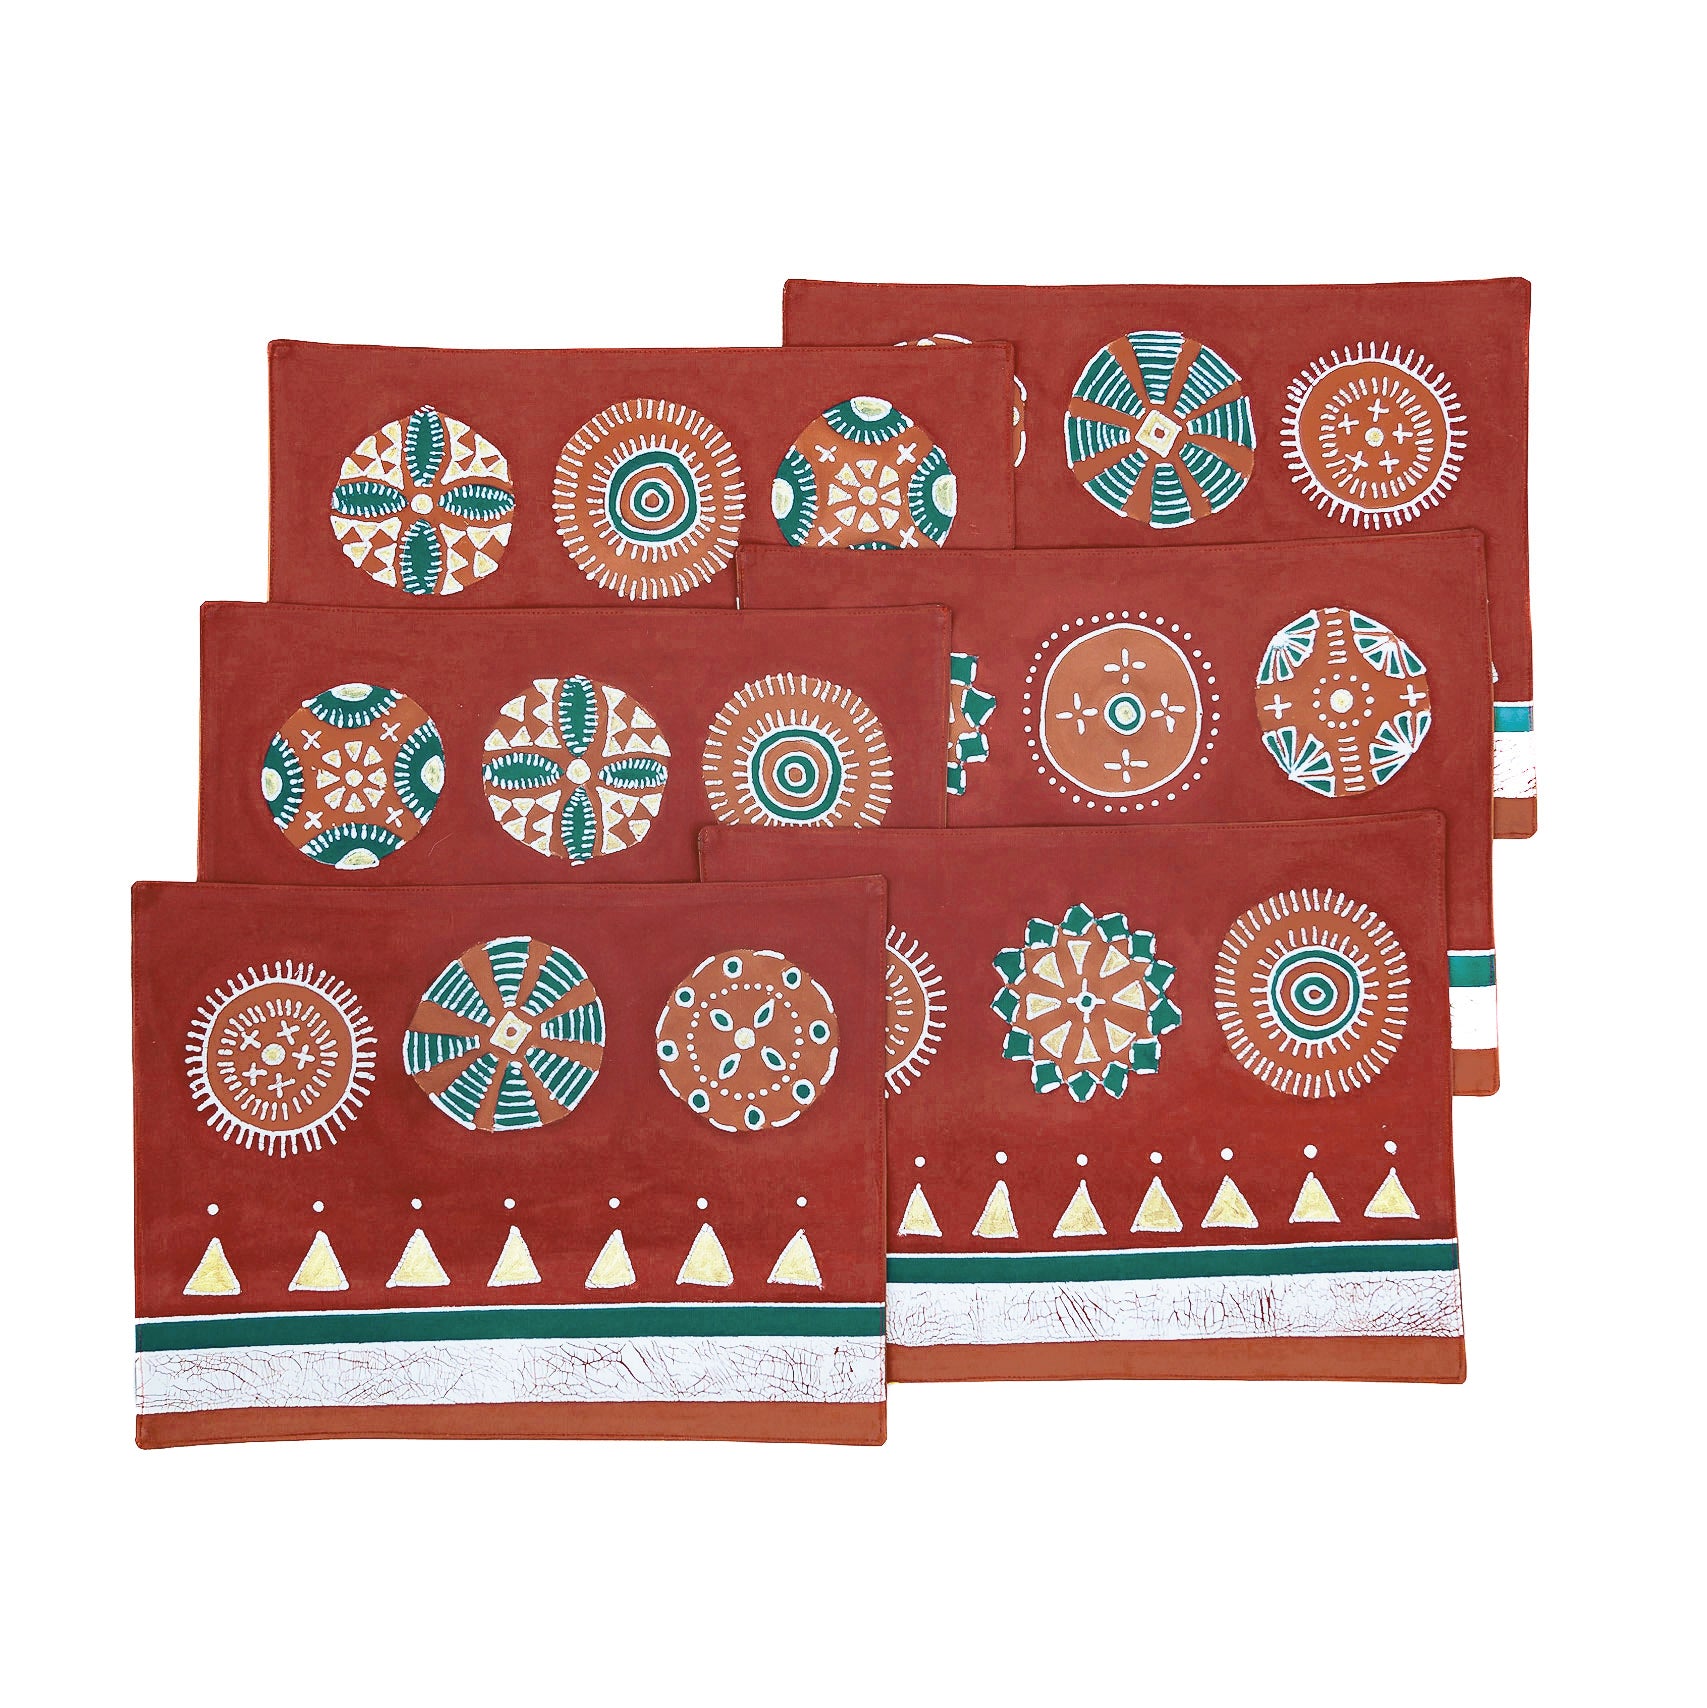 Kuosi Festive Table Mats - Hand Painted by TRIBAL TEXTILES - Handcrafted Home Decor Interiors - African Made